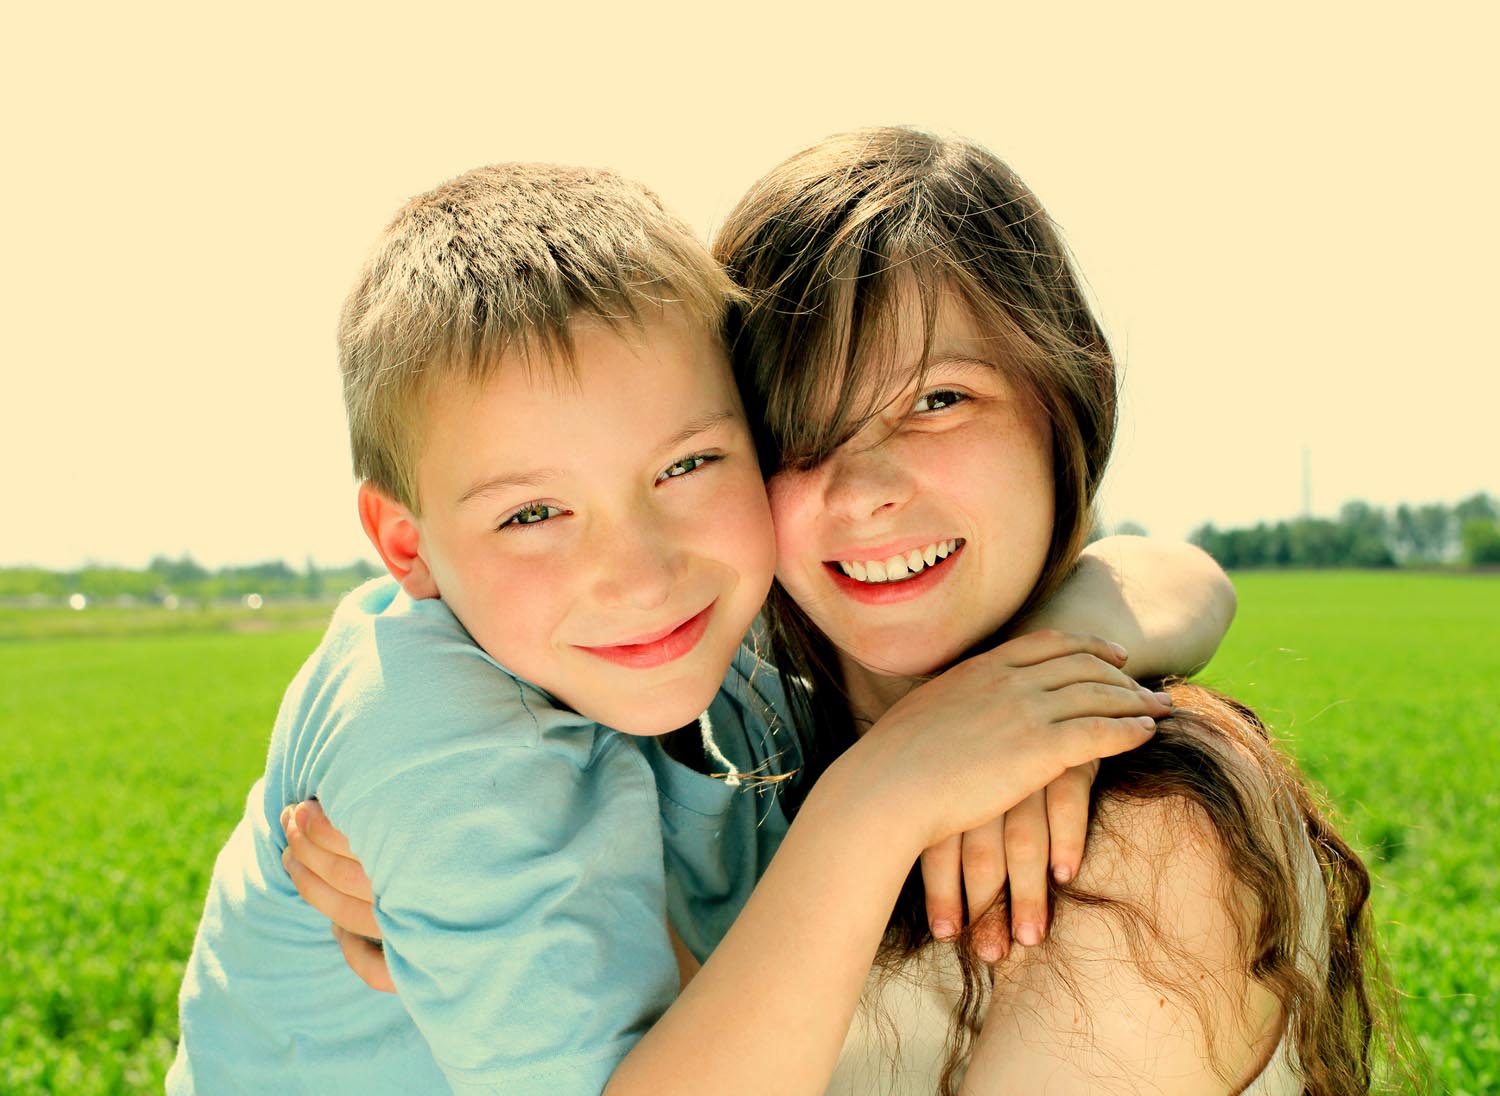 Two young children smiling and hugging each other